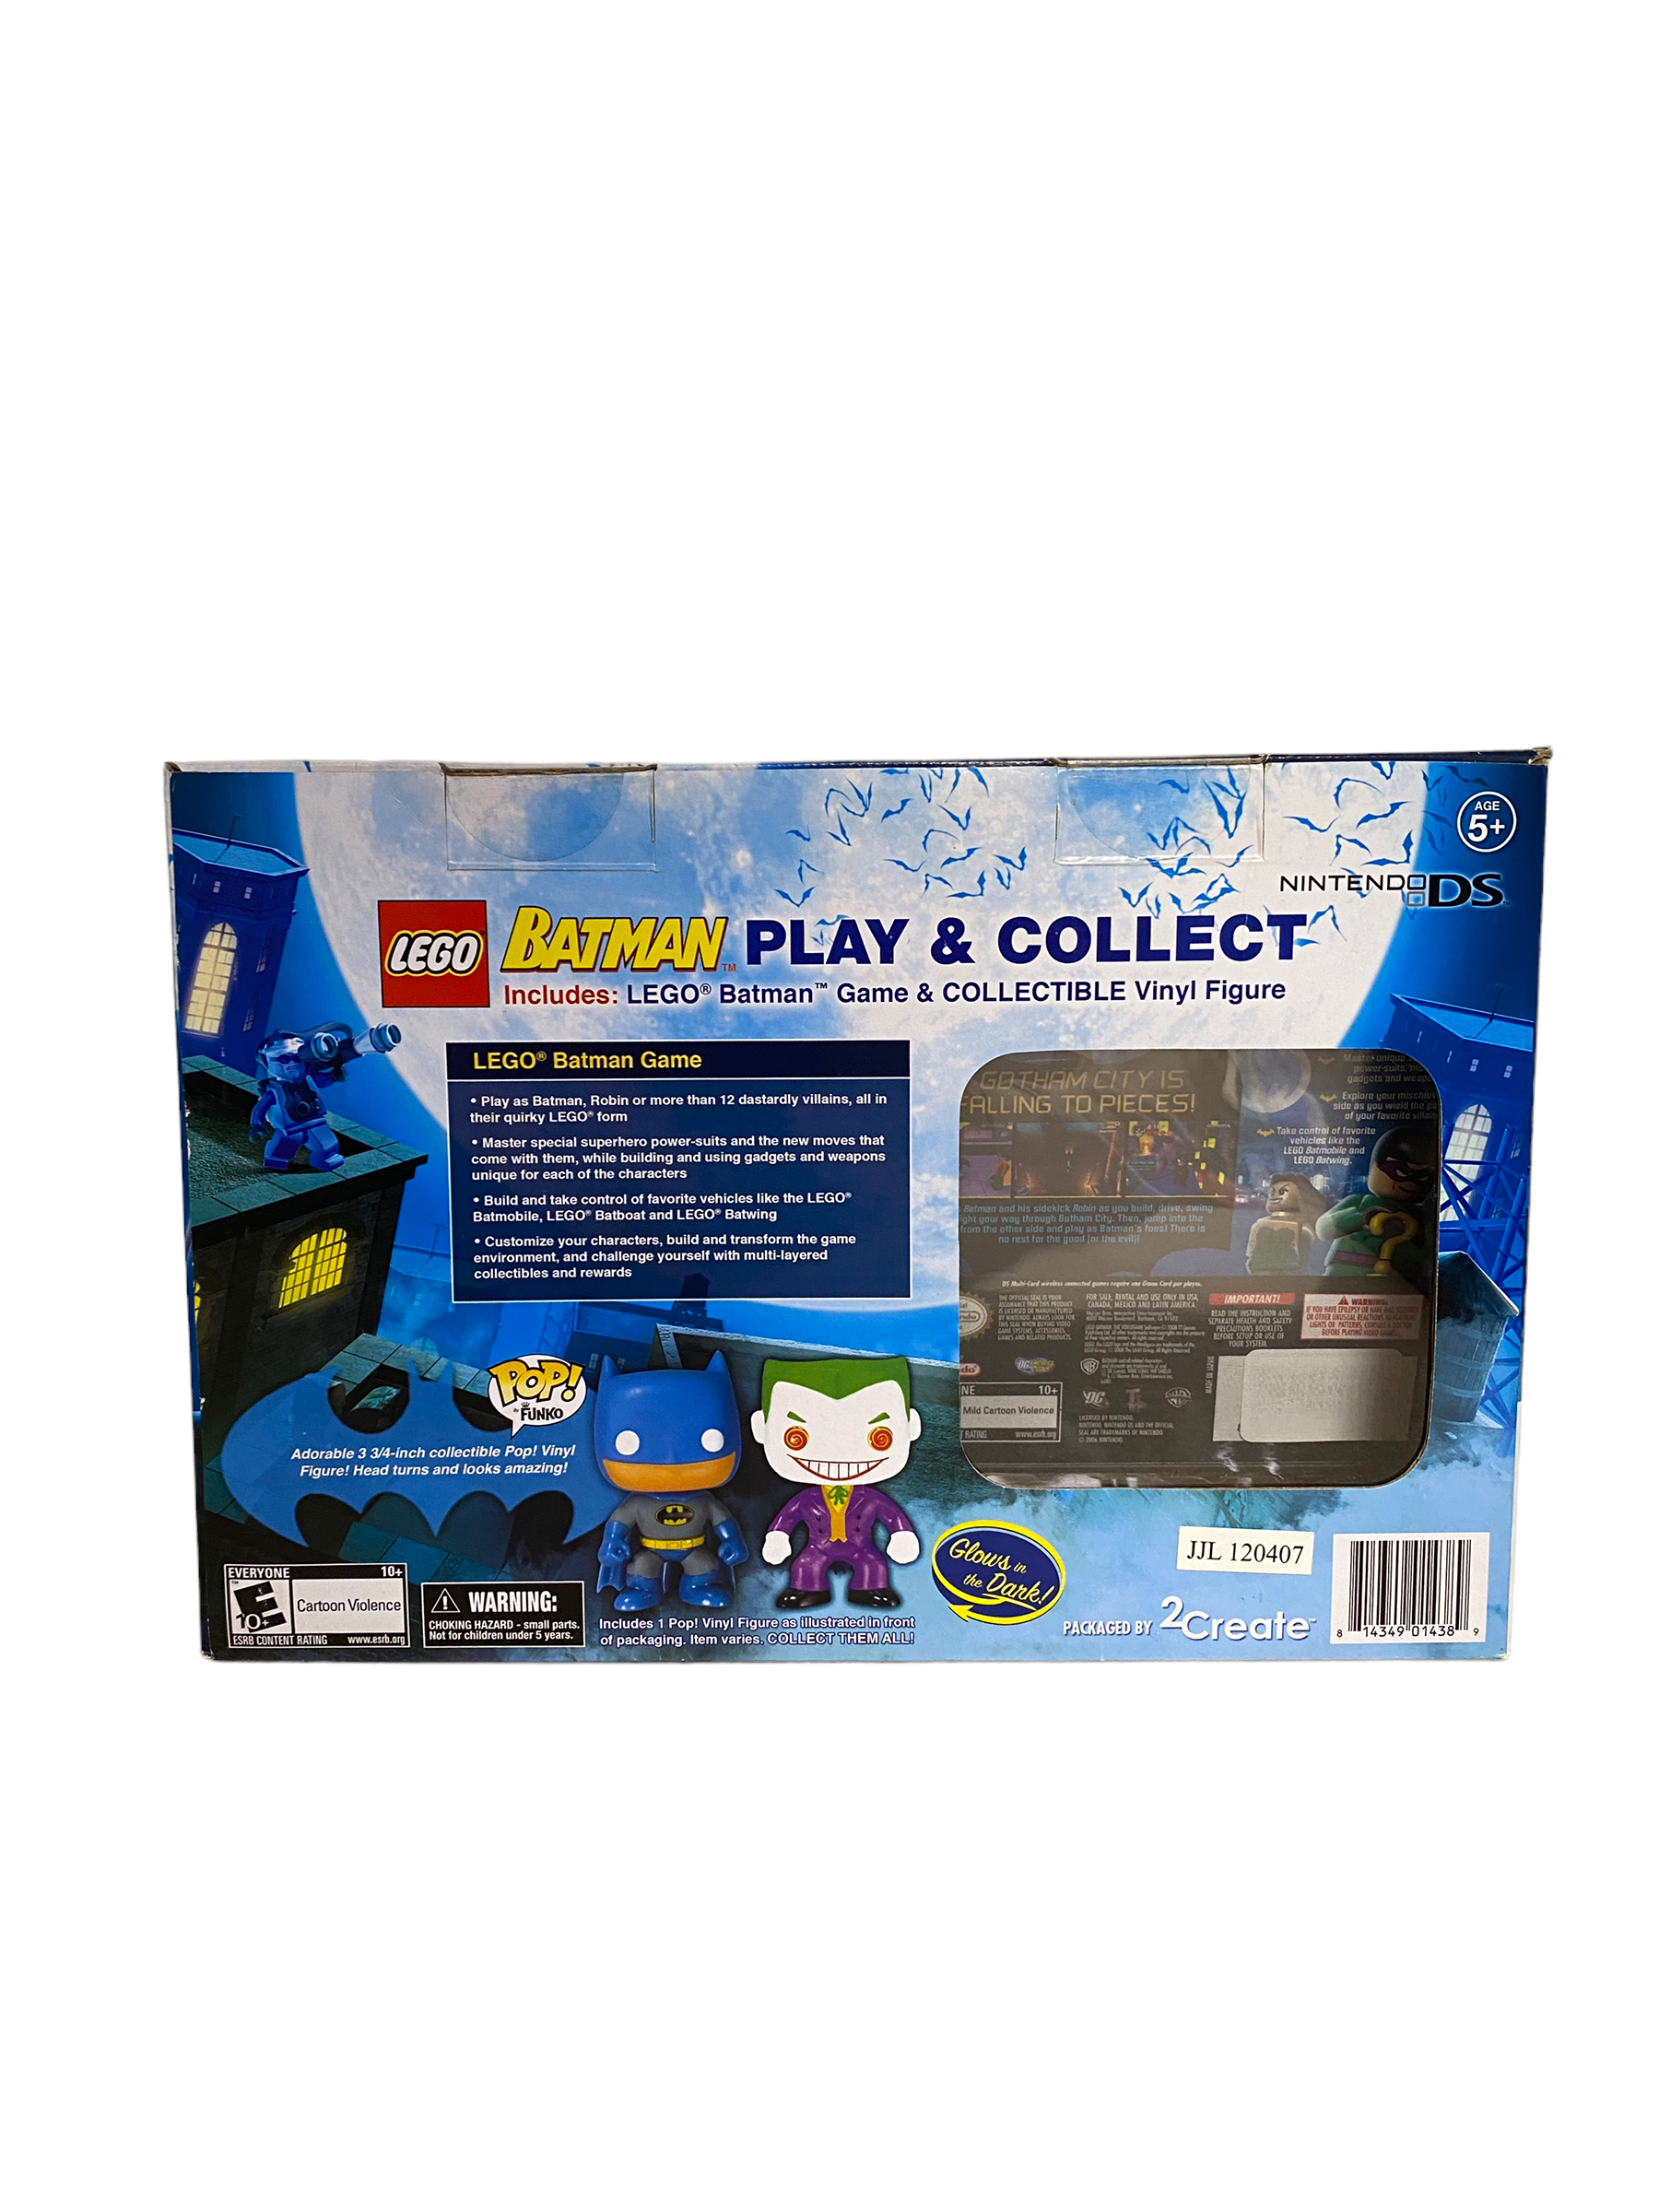 Lego Batman Play And Collect Nintendo DS (Glows In The Dark) Funko Pop Bundle! - Condition 8.5/10